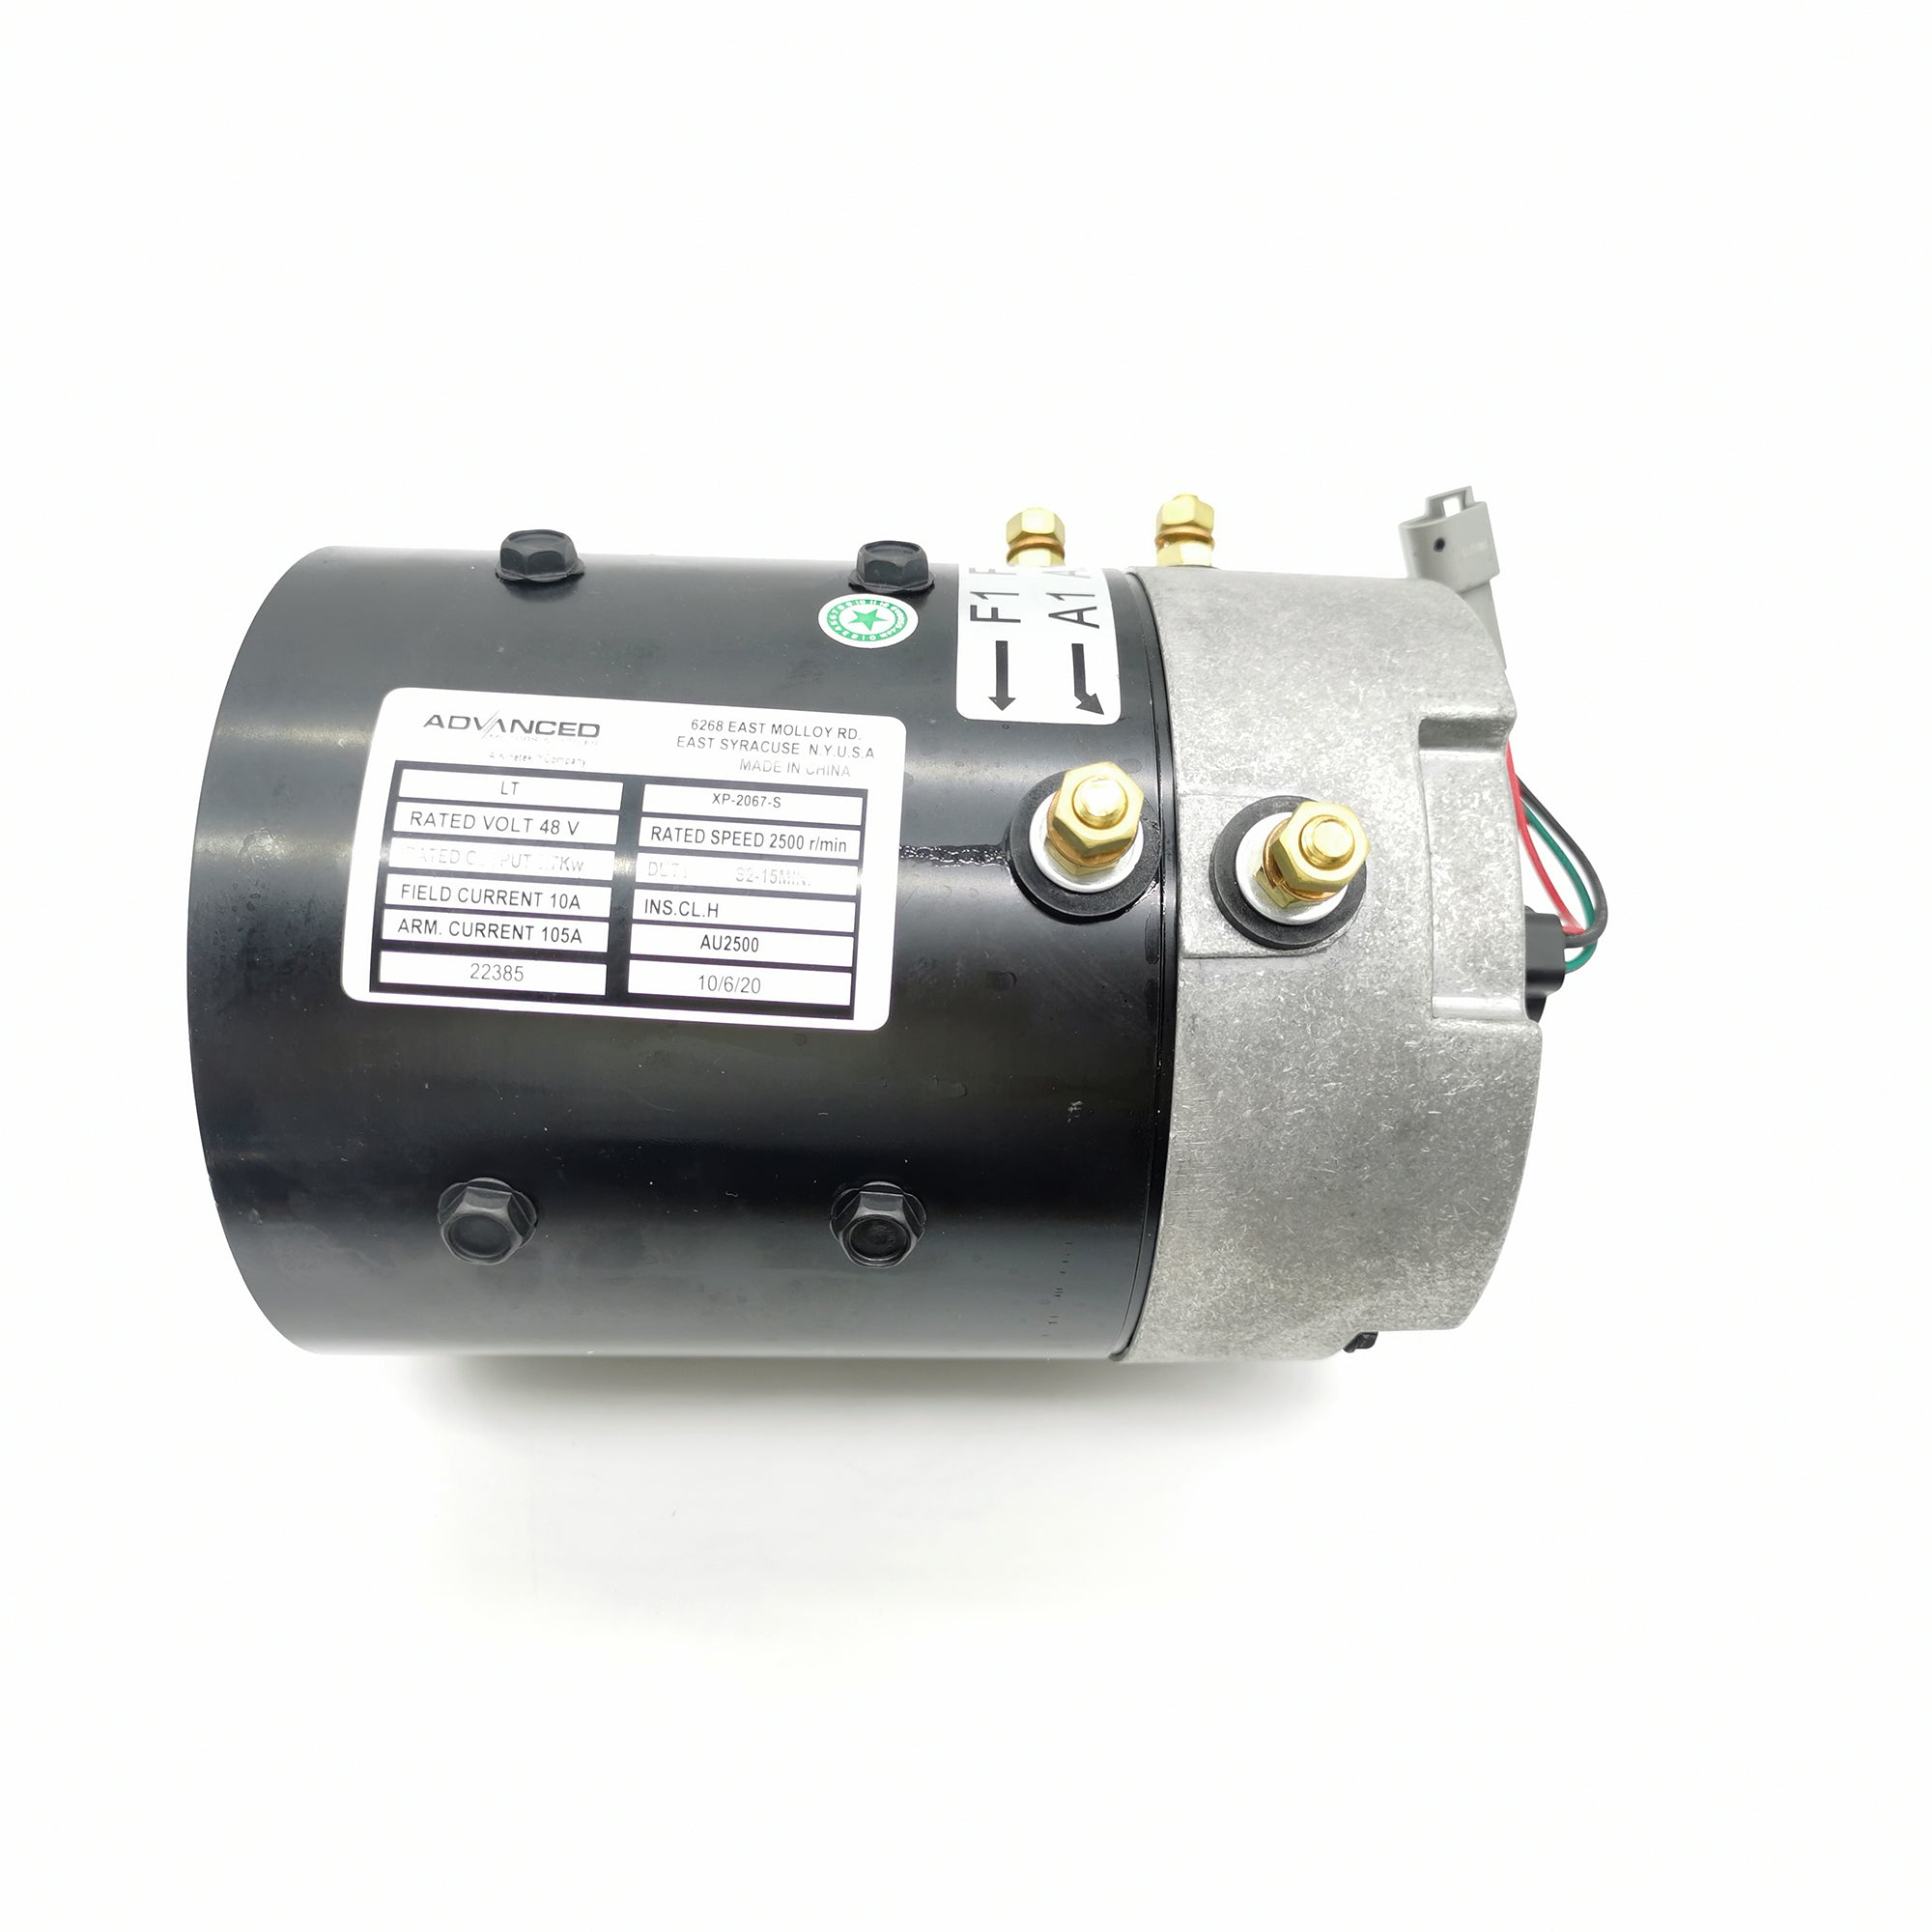 DC SepEx Motor 48V 3.7KW Replace Club Car 102775101 compatible with Electric Vehicle - KUDUPARTS